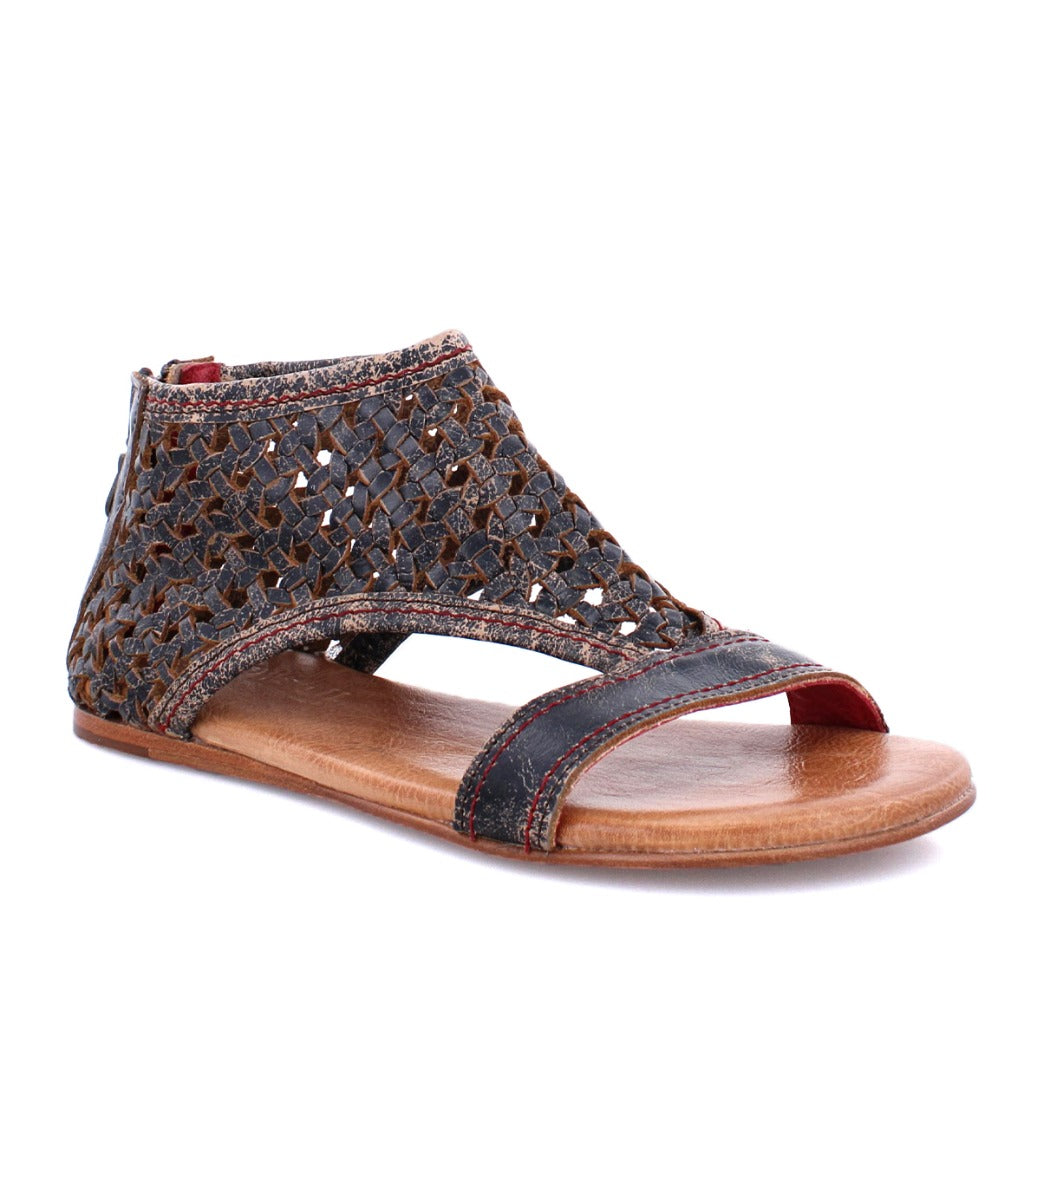 Bed Stu Kimberly women's leather sandals.